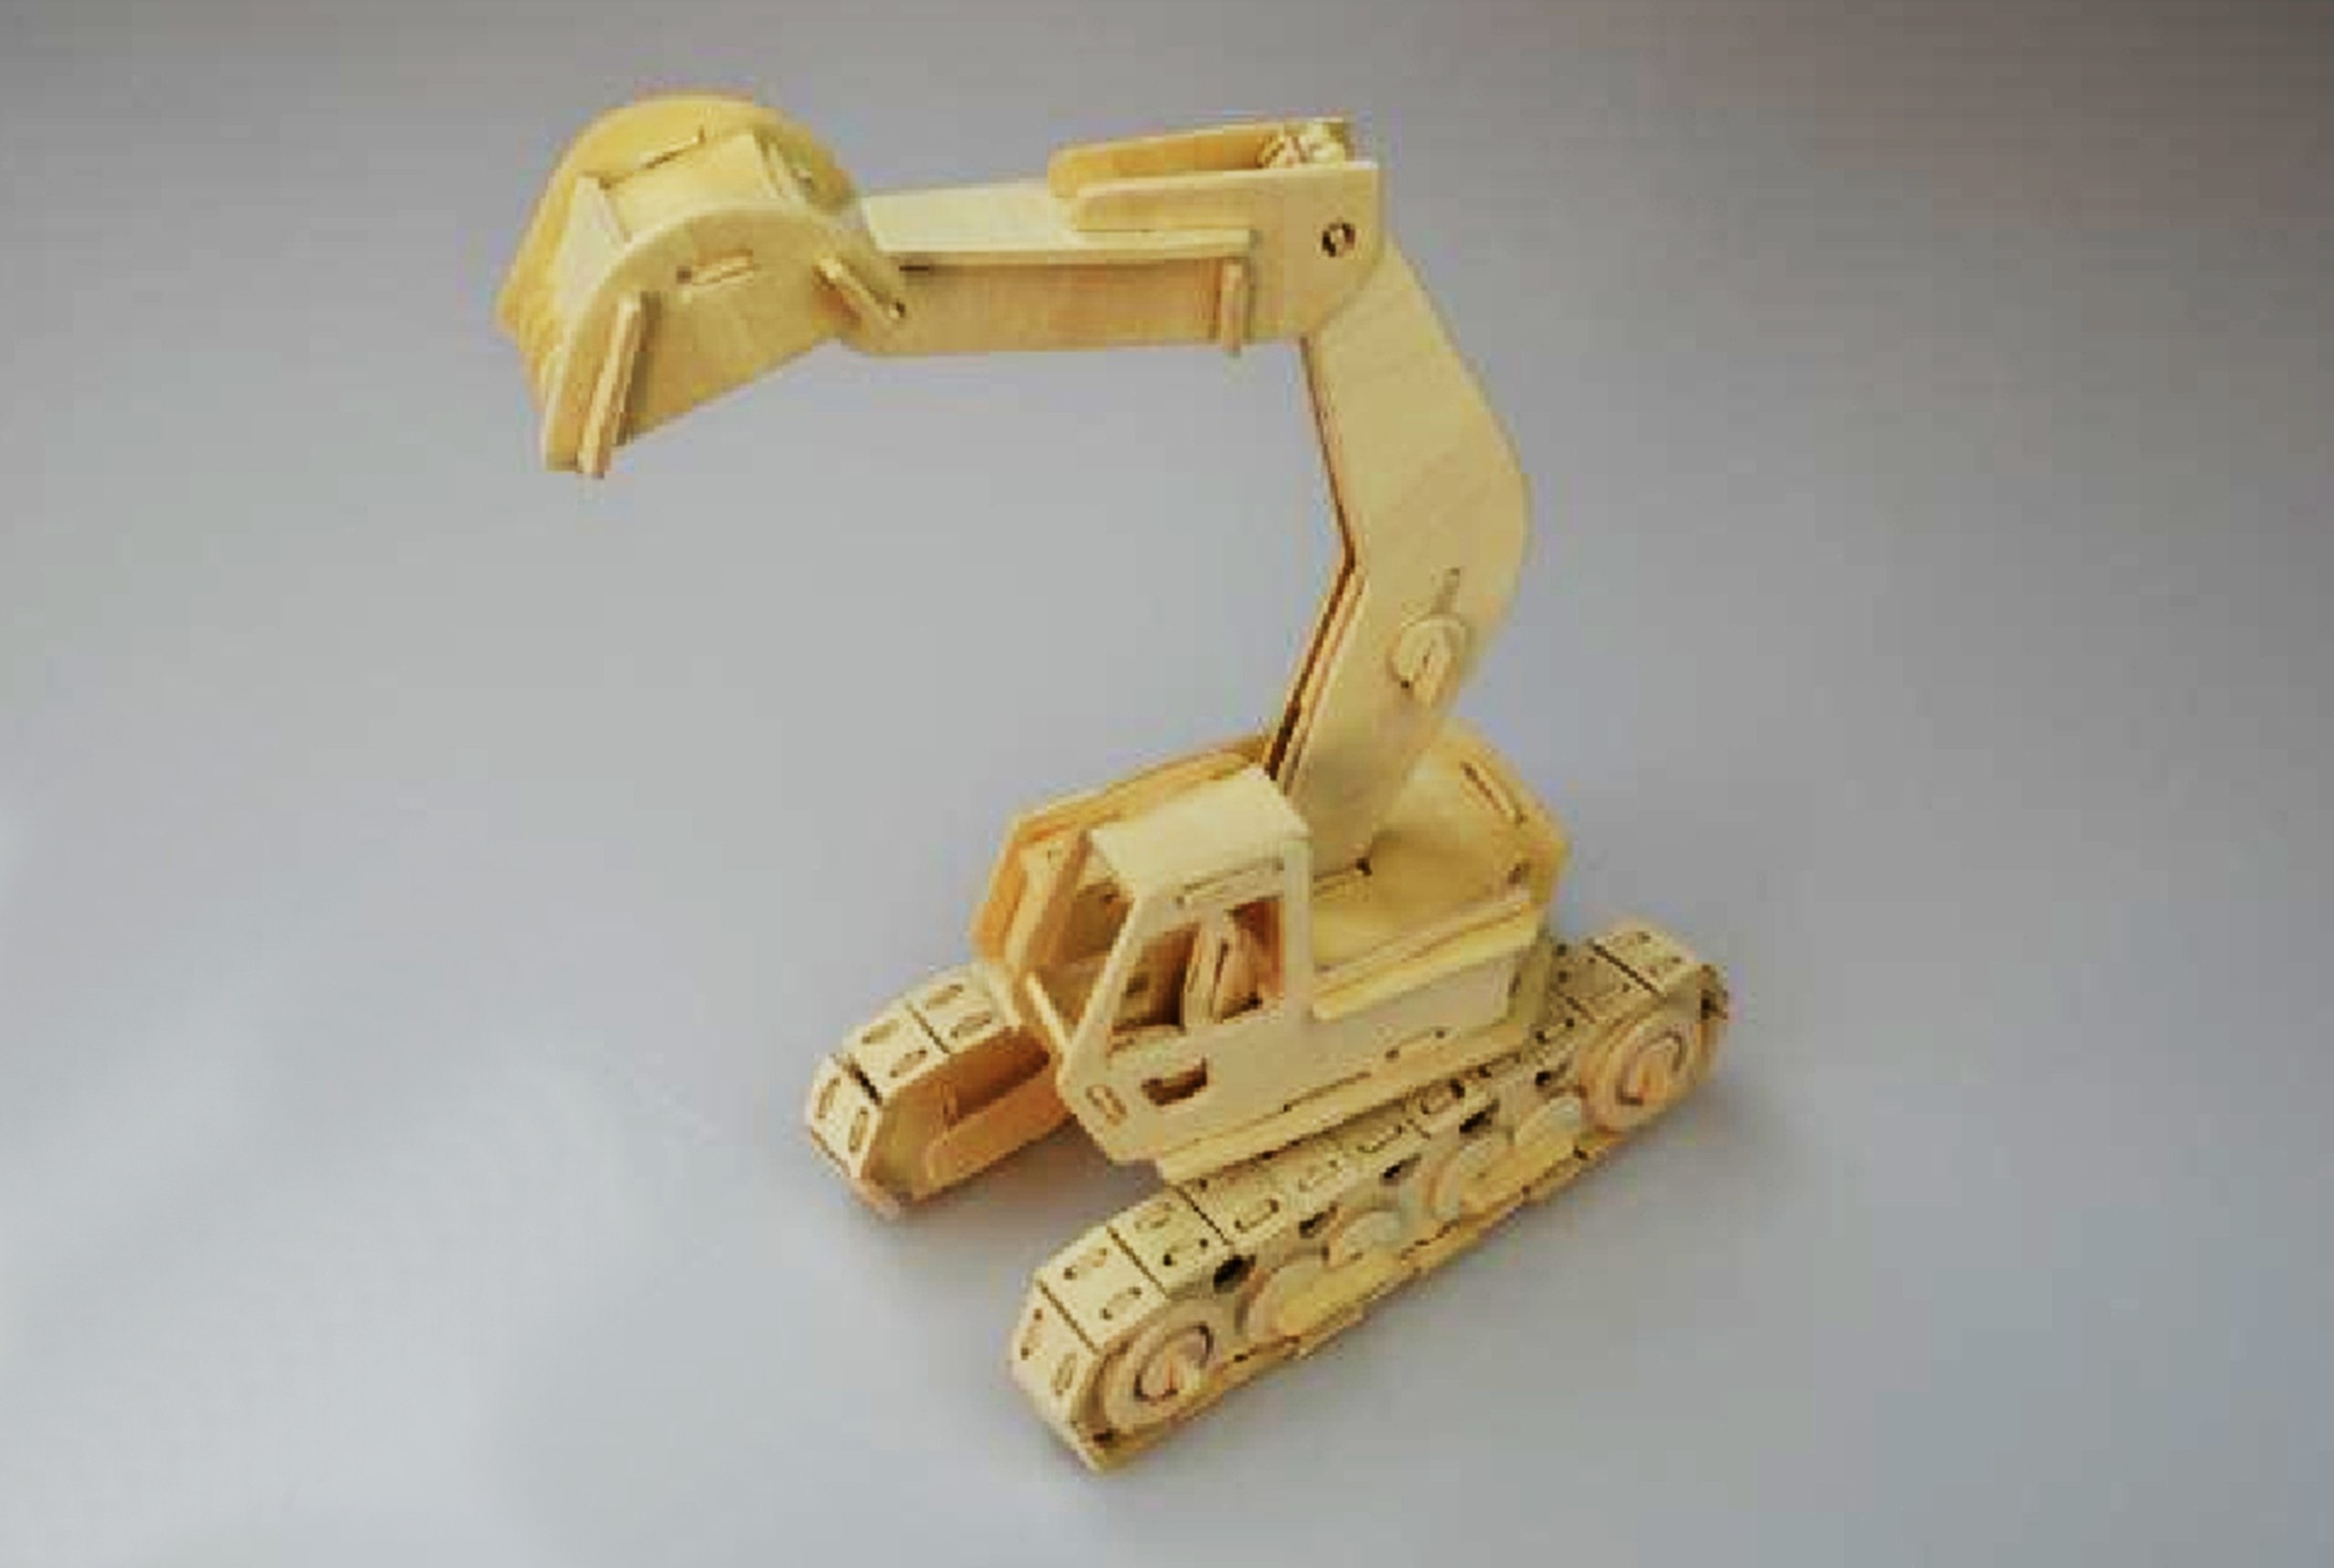 Excavator Model Laser Cutting plans PDF File Free Download - 3axis.co